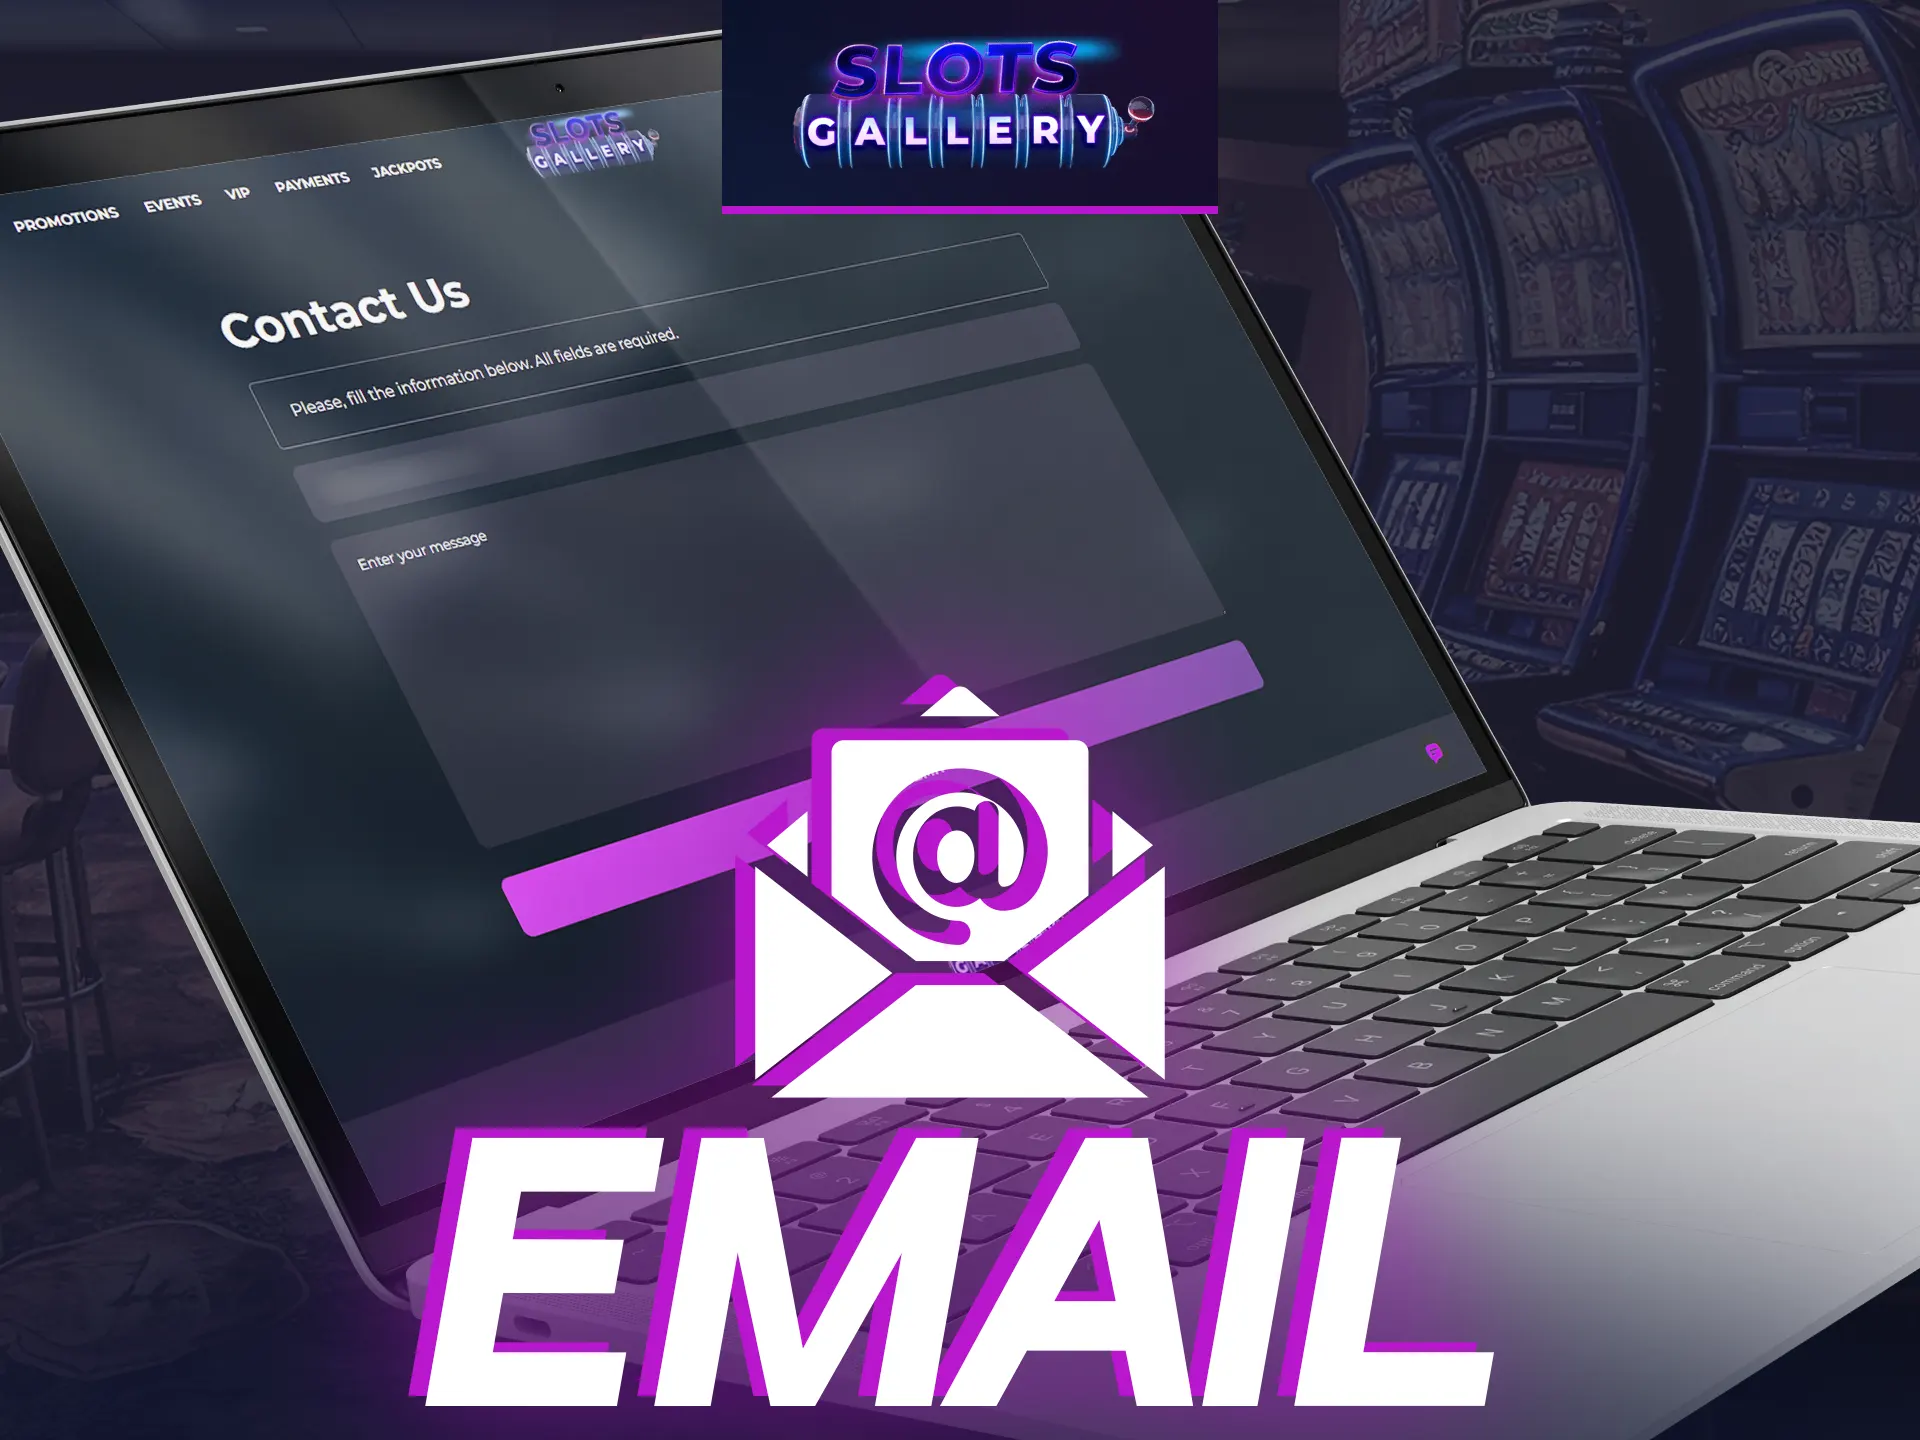 Email Slots Gallery with contact form.